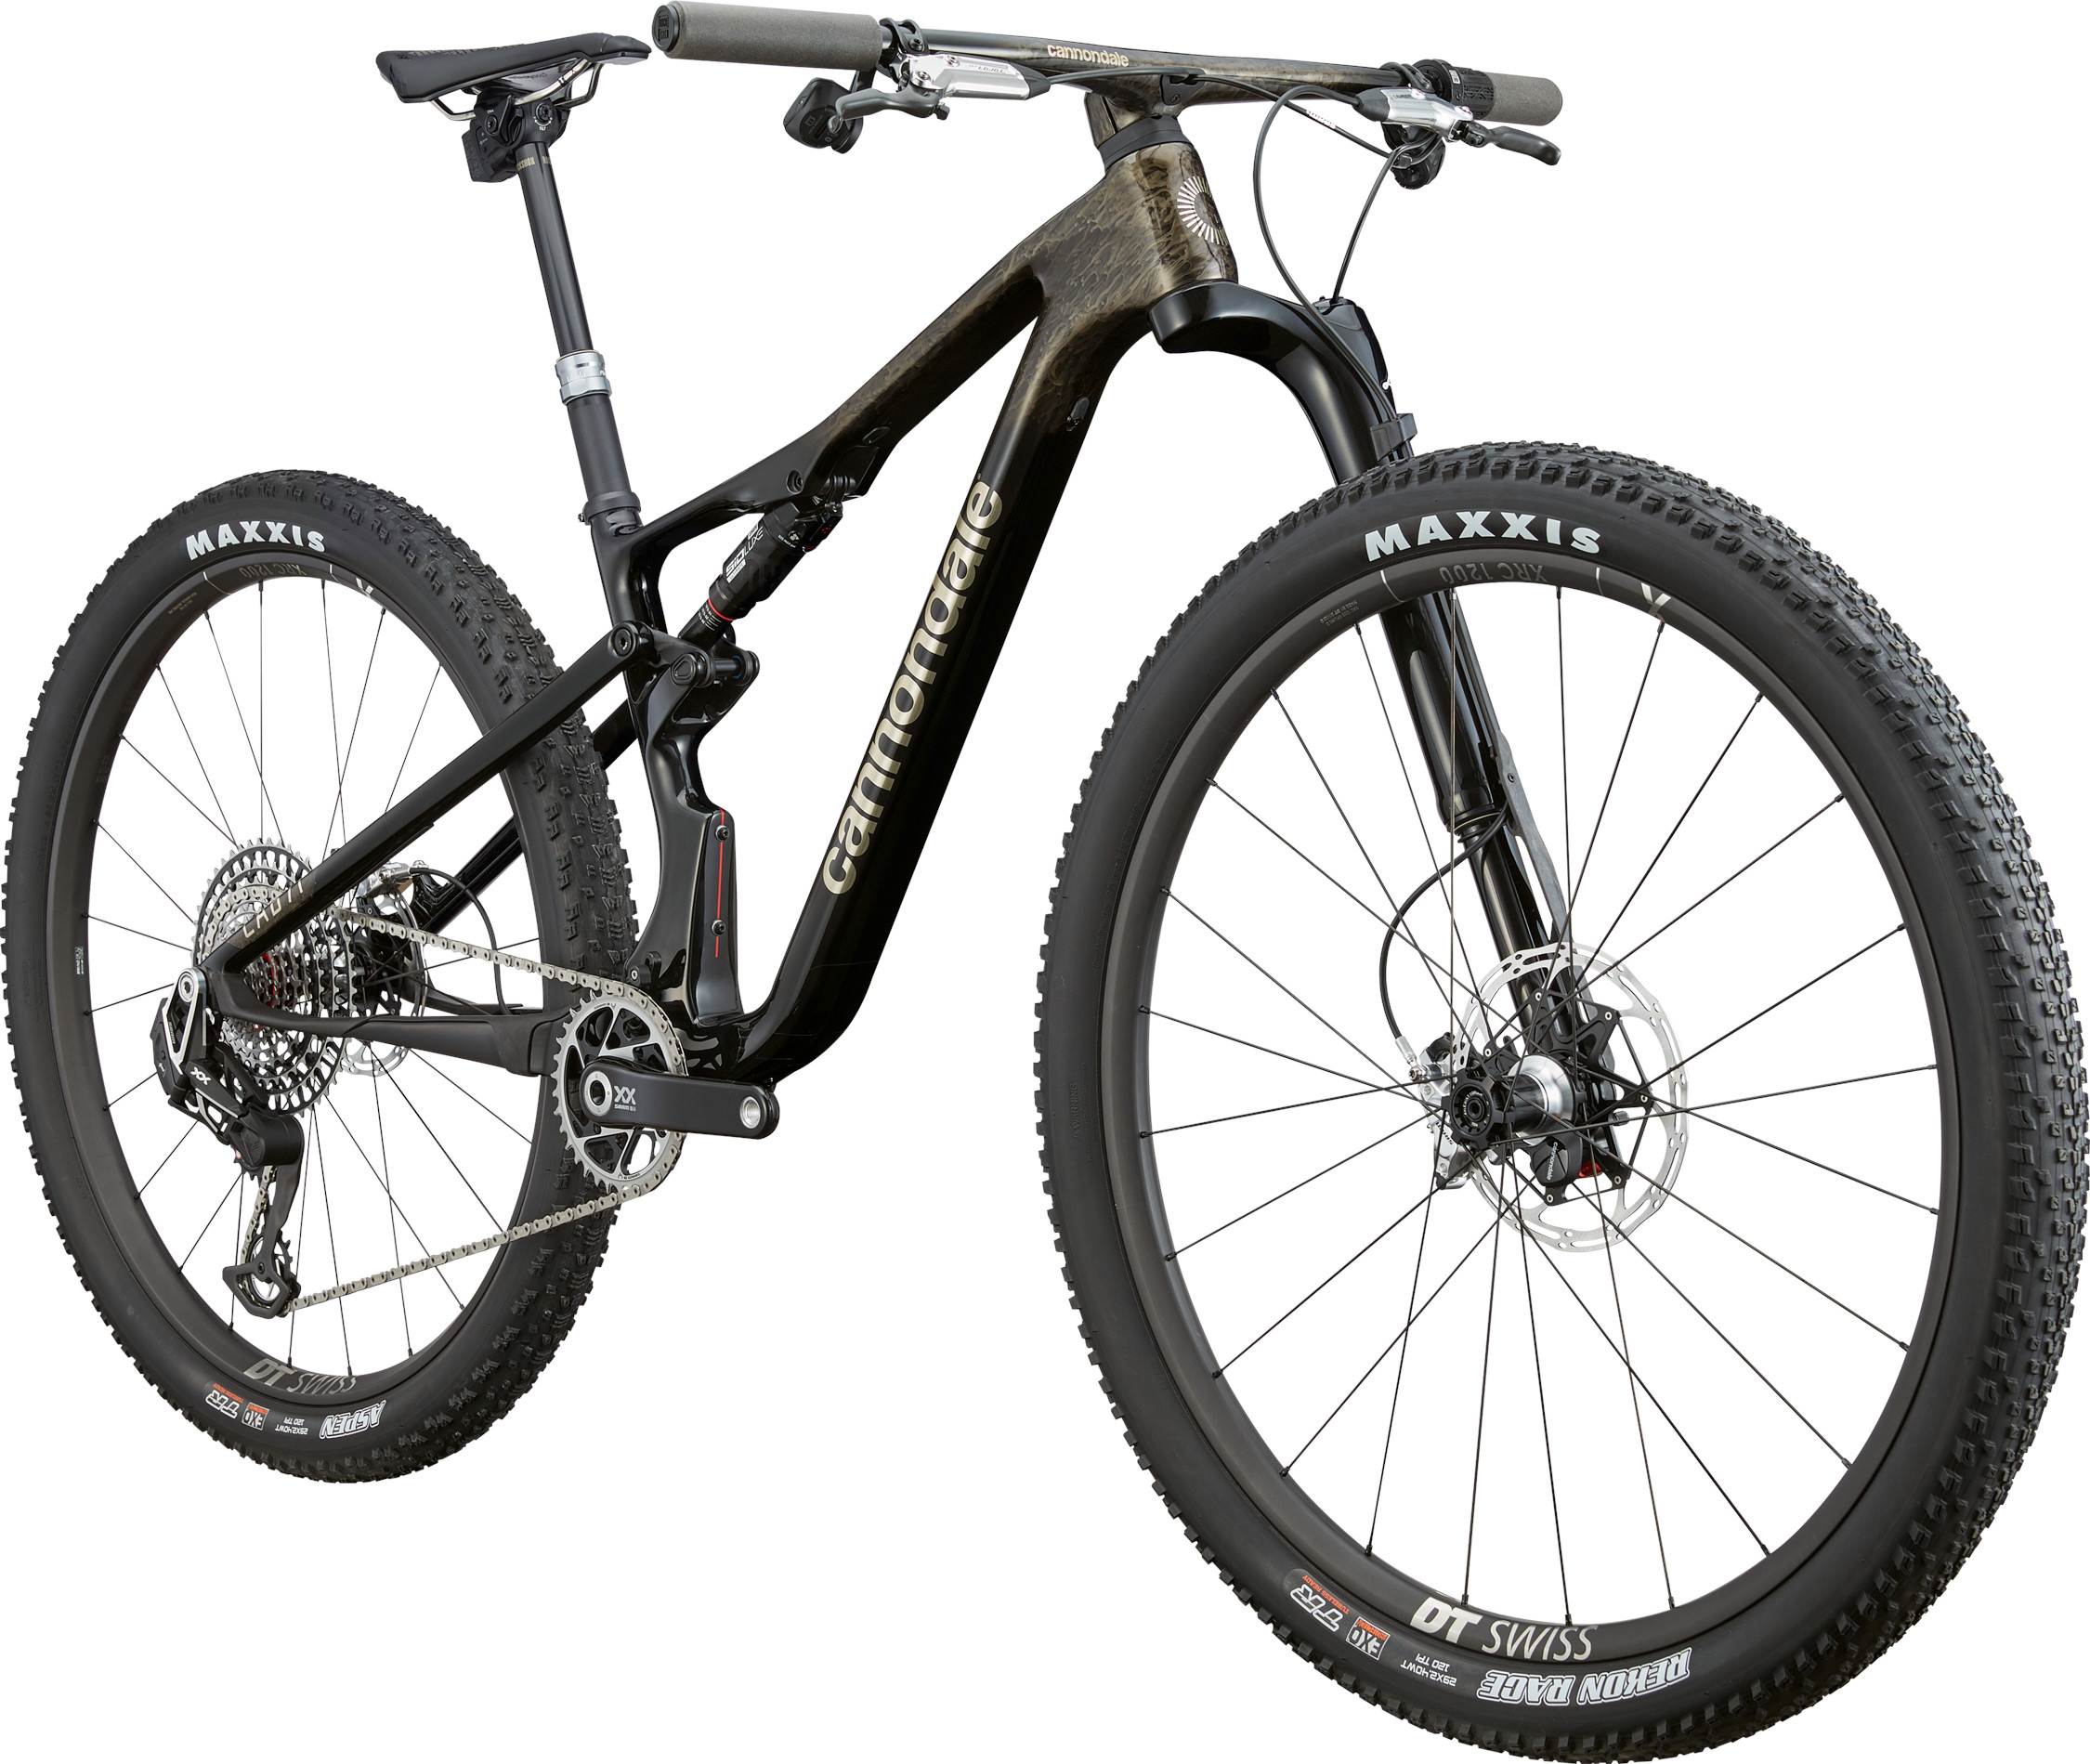 Updated Cannondale Scalpel Gets 120mm Travel Front & Rear, One Piece Carbon Bar